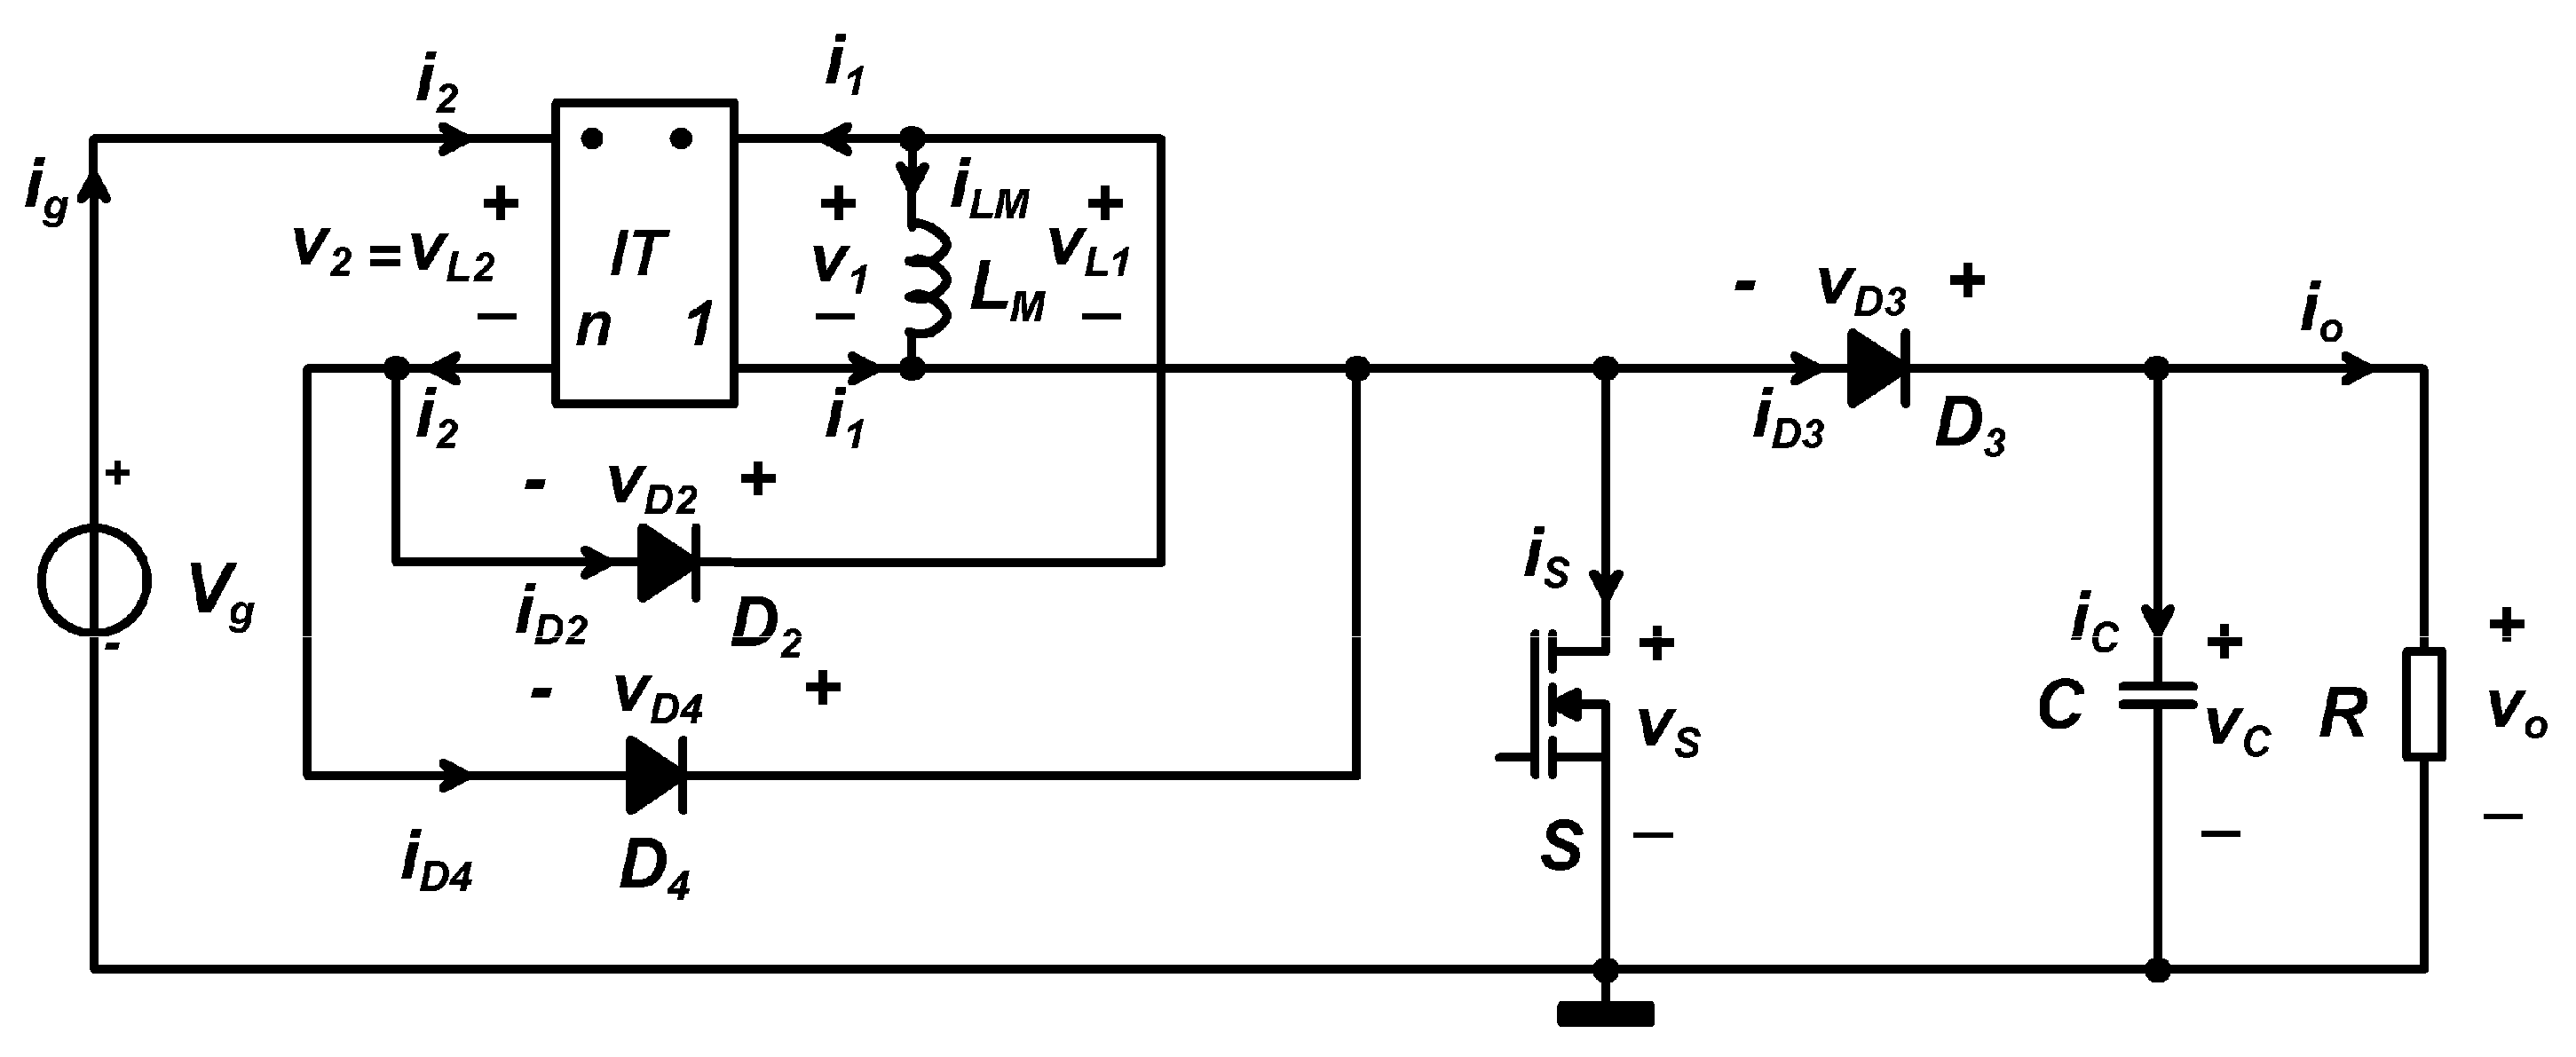 File:Multiloop-circuit-example marked.svg - Wikimedia Commons